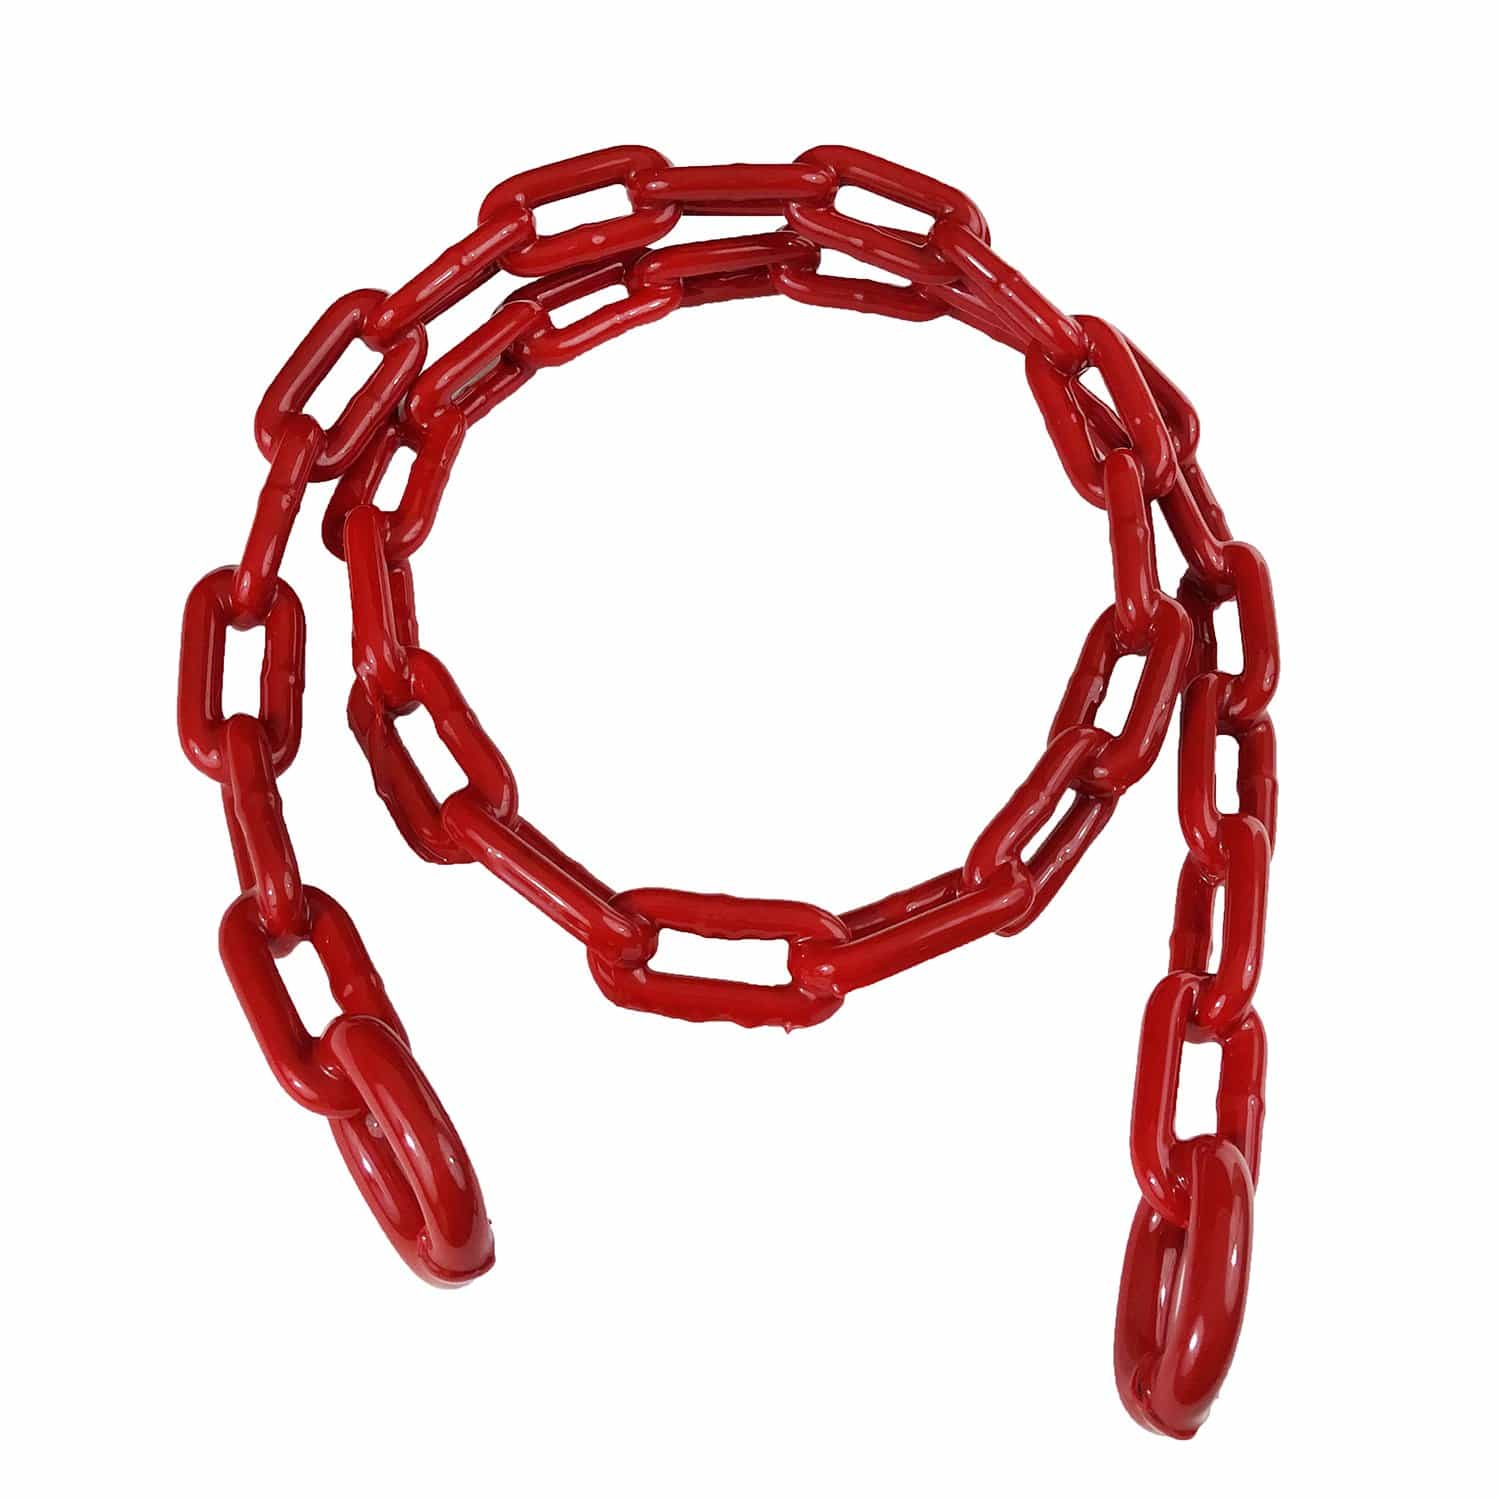 Greenfield 2116-RD PVC Coated Anchor Chain, Red, 5/16" x 5'